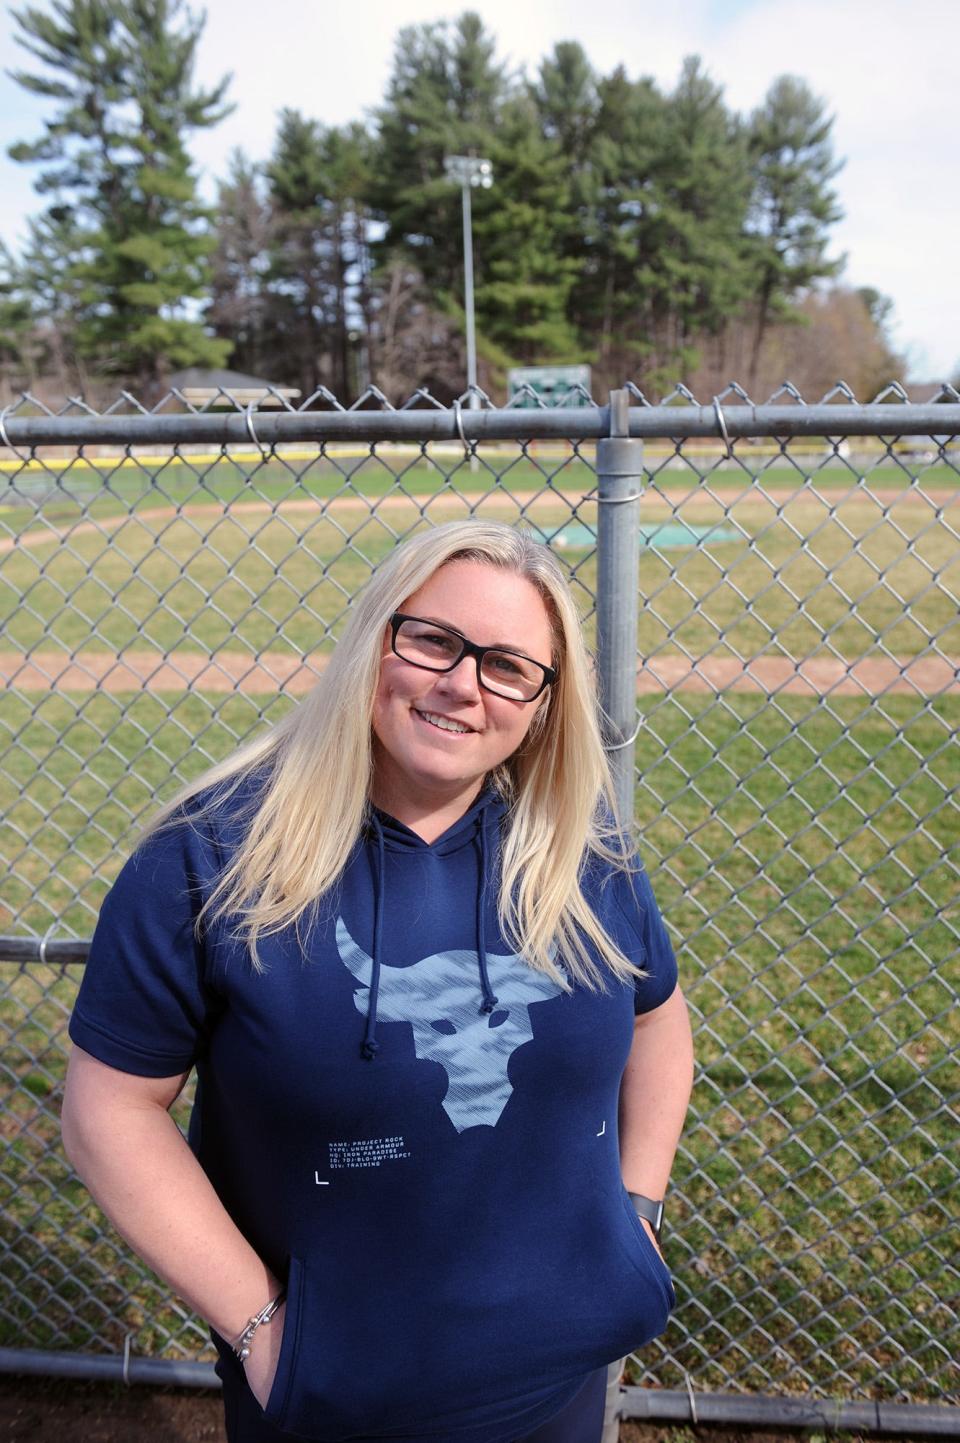 Karrah Ellis will be the new Franklin High School athletic director,  pictured at Dean Park in Shrewsbury, April 21, 2022.